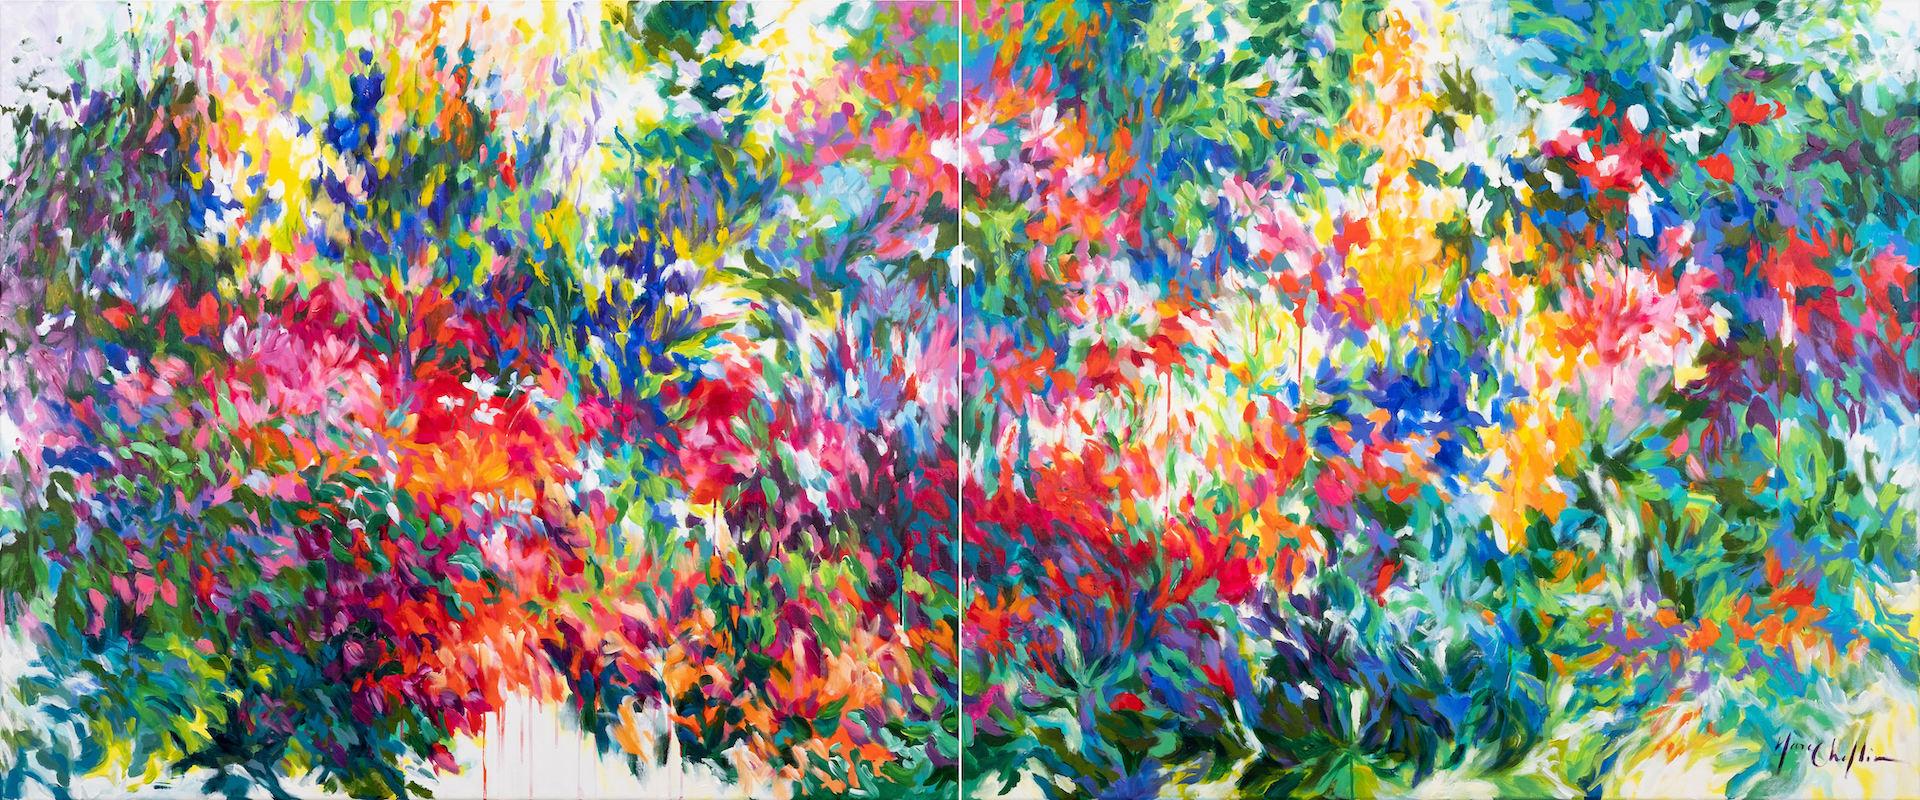 Françoise’s Garden BY MARY CHAPLIN, Bright Art, Large Paintings, Floral Art